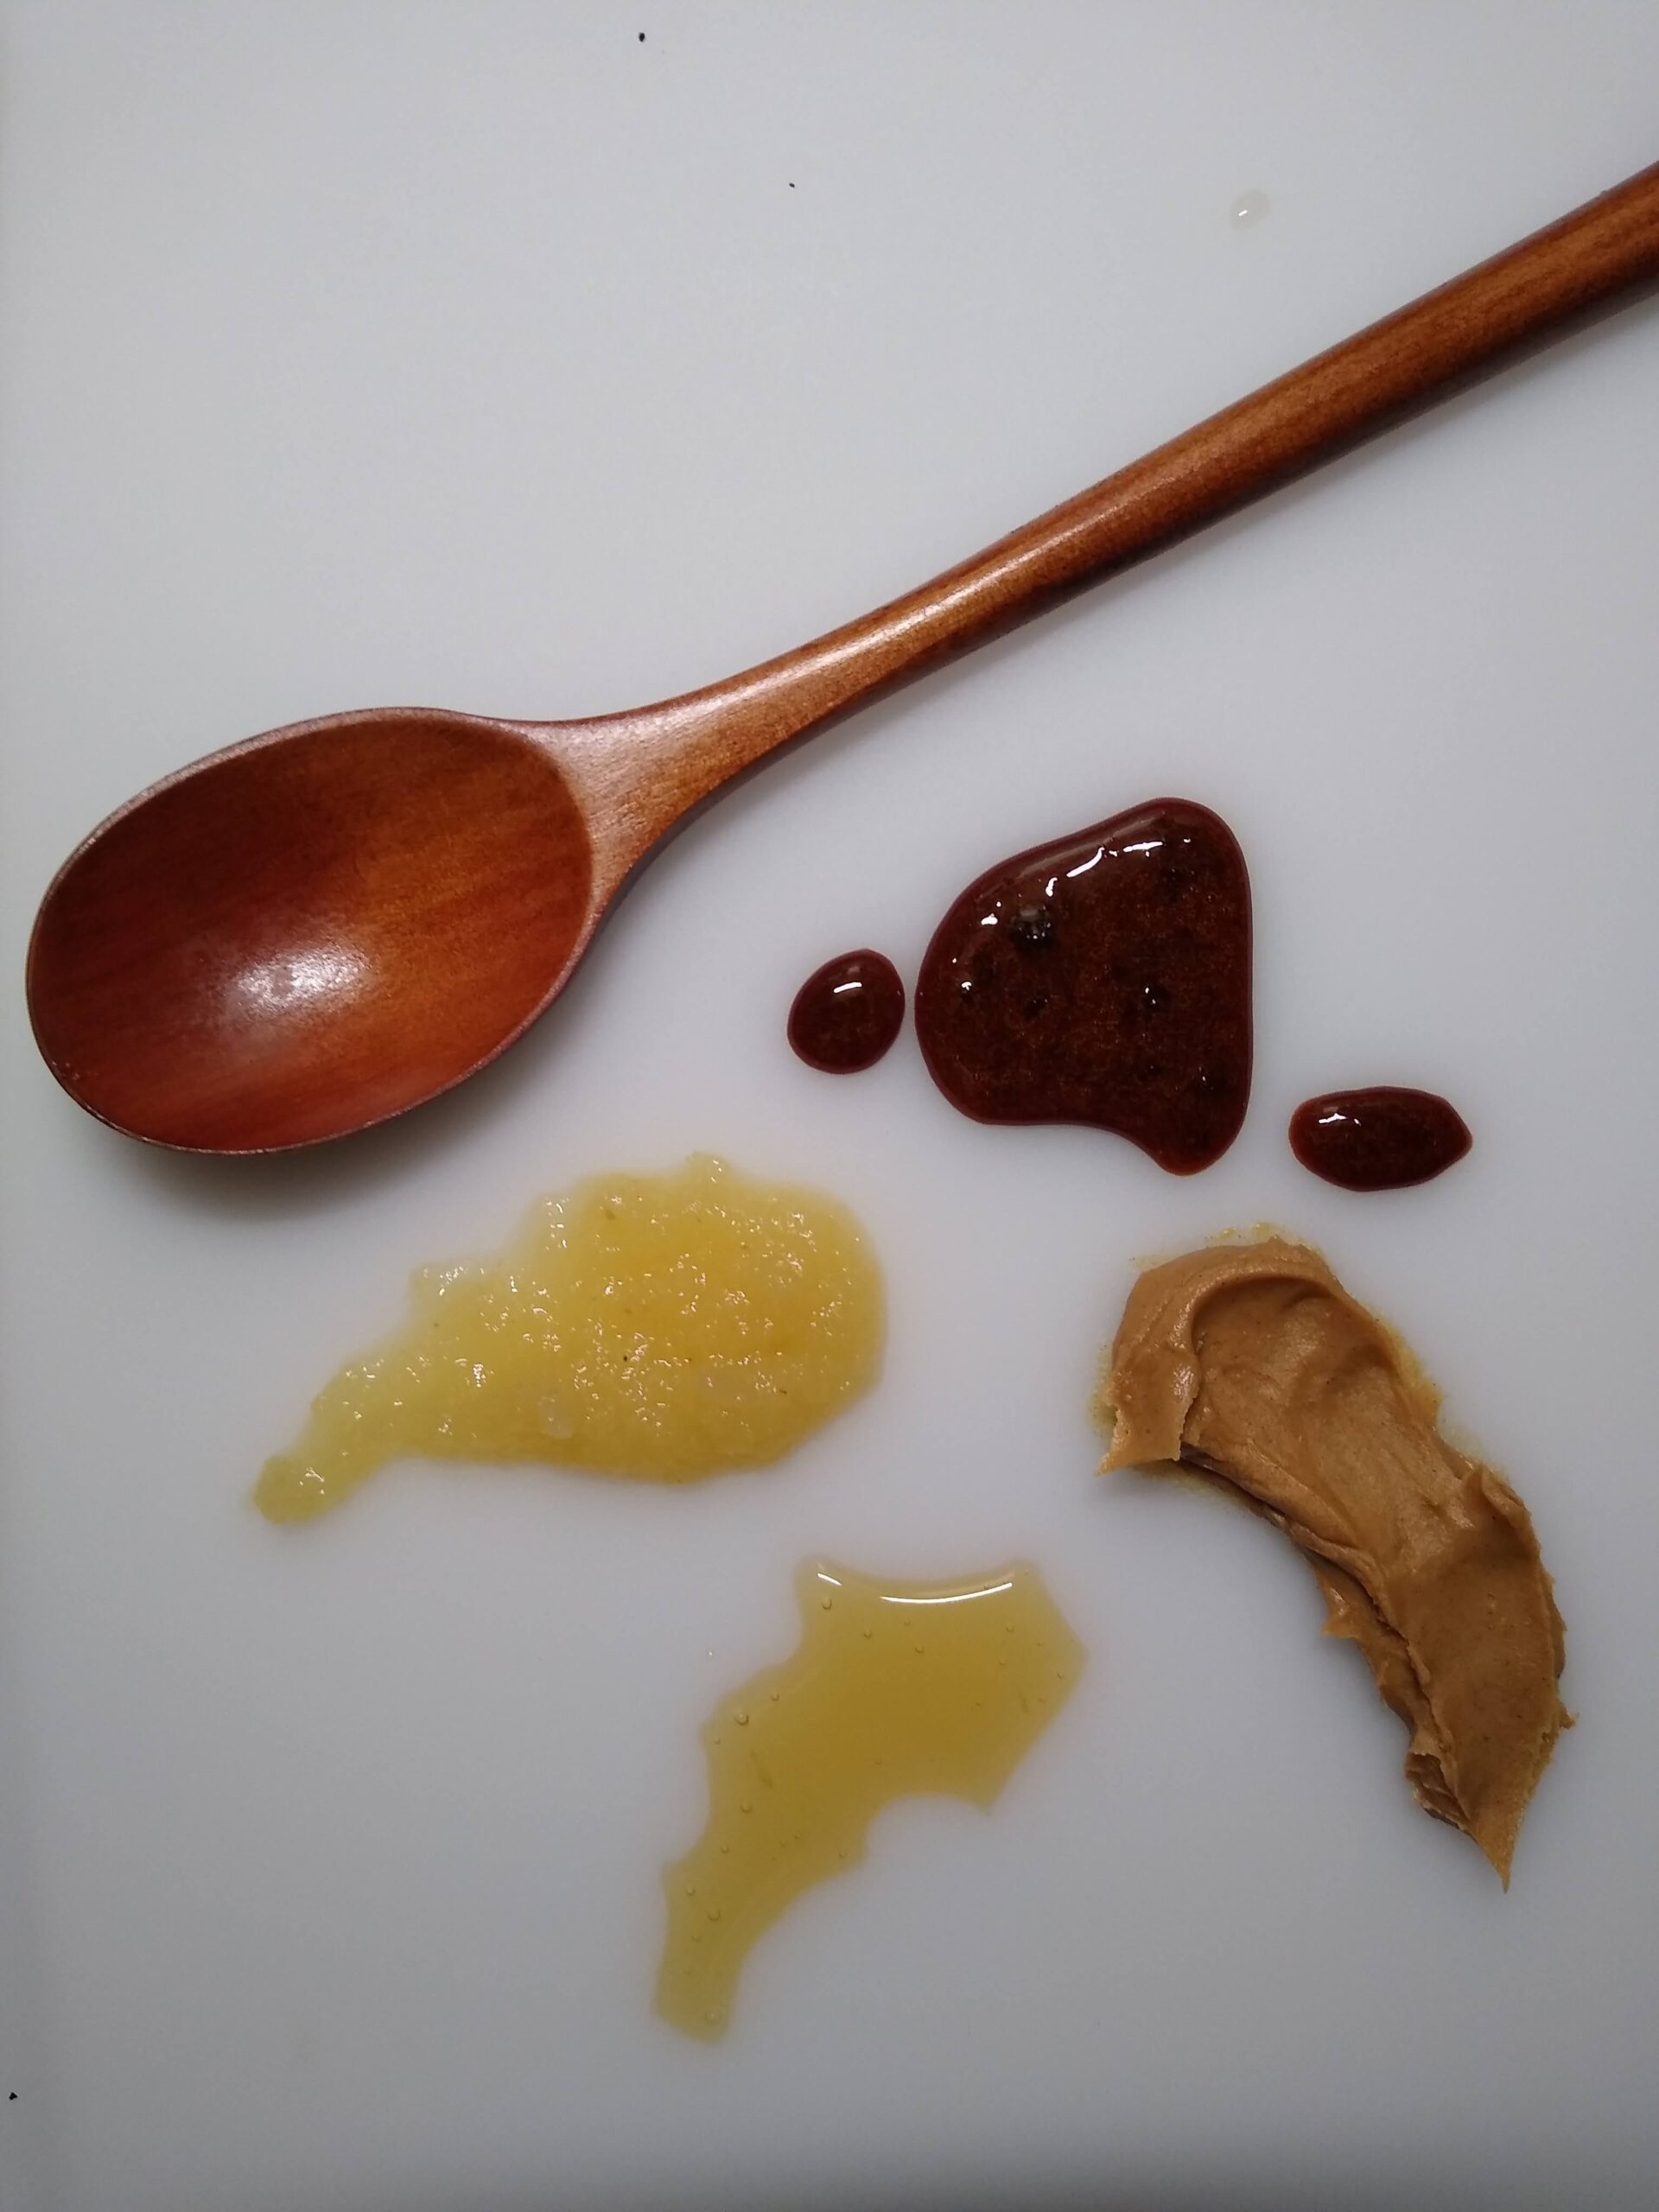 Smears for horse lick mat and spoon on a white surface, including applesauce, honey, peanut butter, and molasses